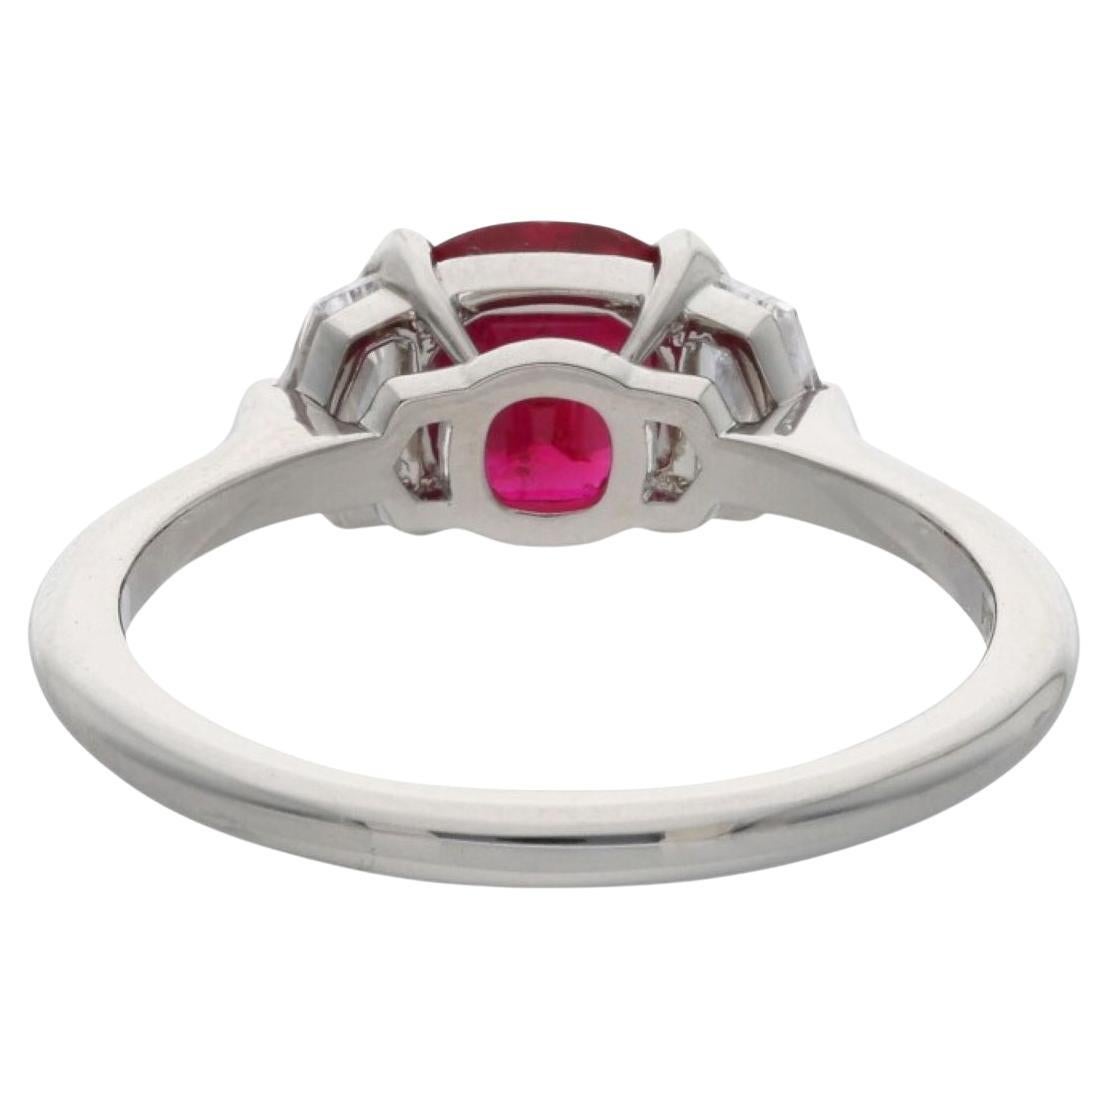 beautiful ring featuring a central ruby and two shield-cut diamonds set in platinum. Here's a breakdown of the details provided:

Ruby: The central ruby weighs 1.41 carats. It is described as red in color, originating from Burma (now known as